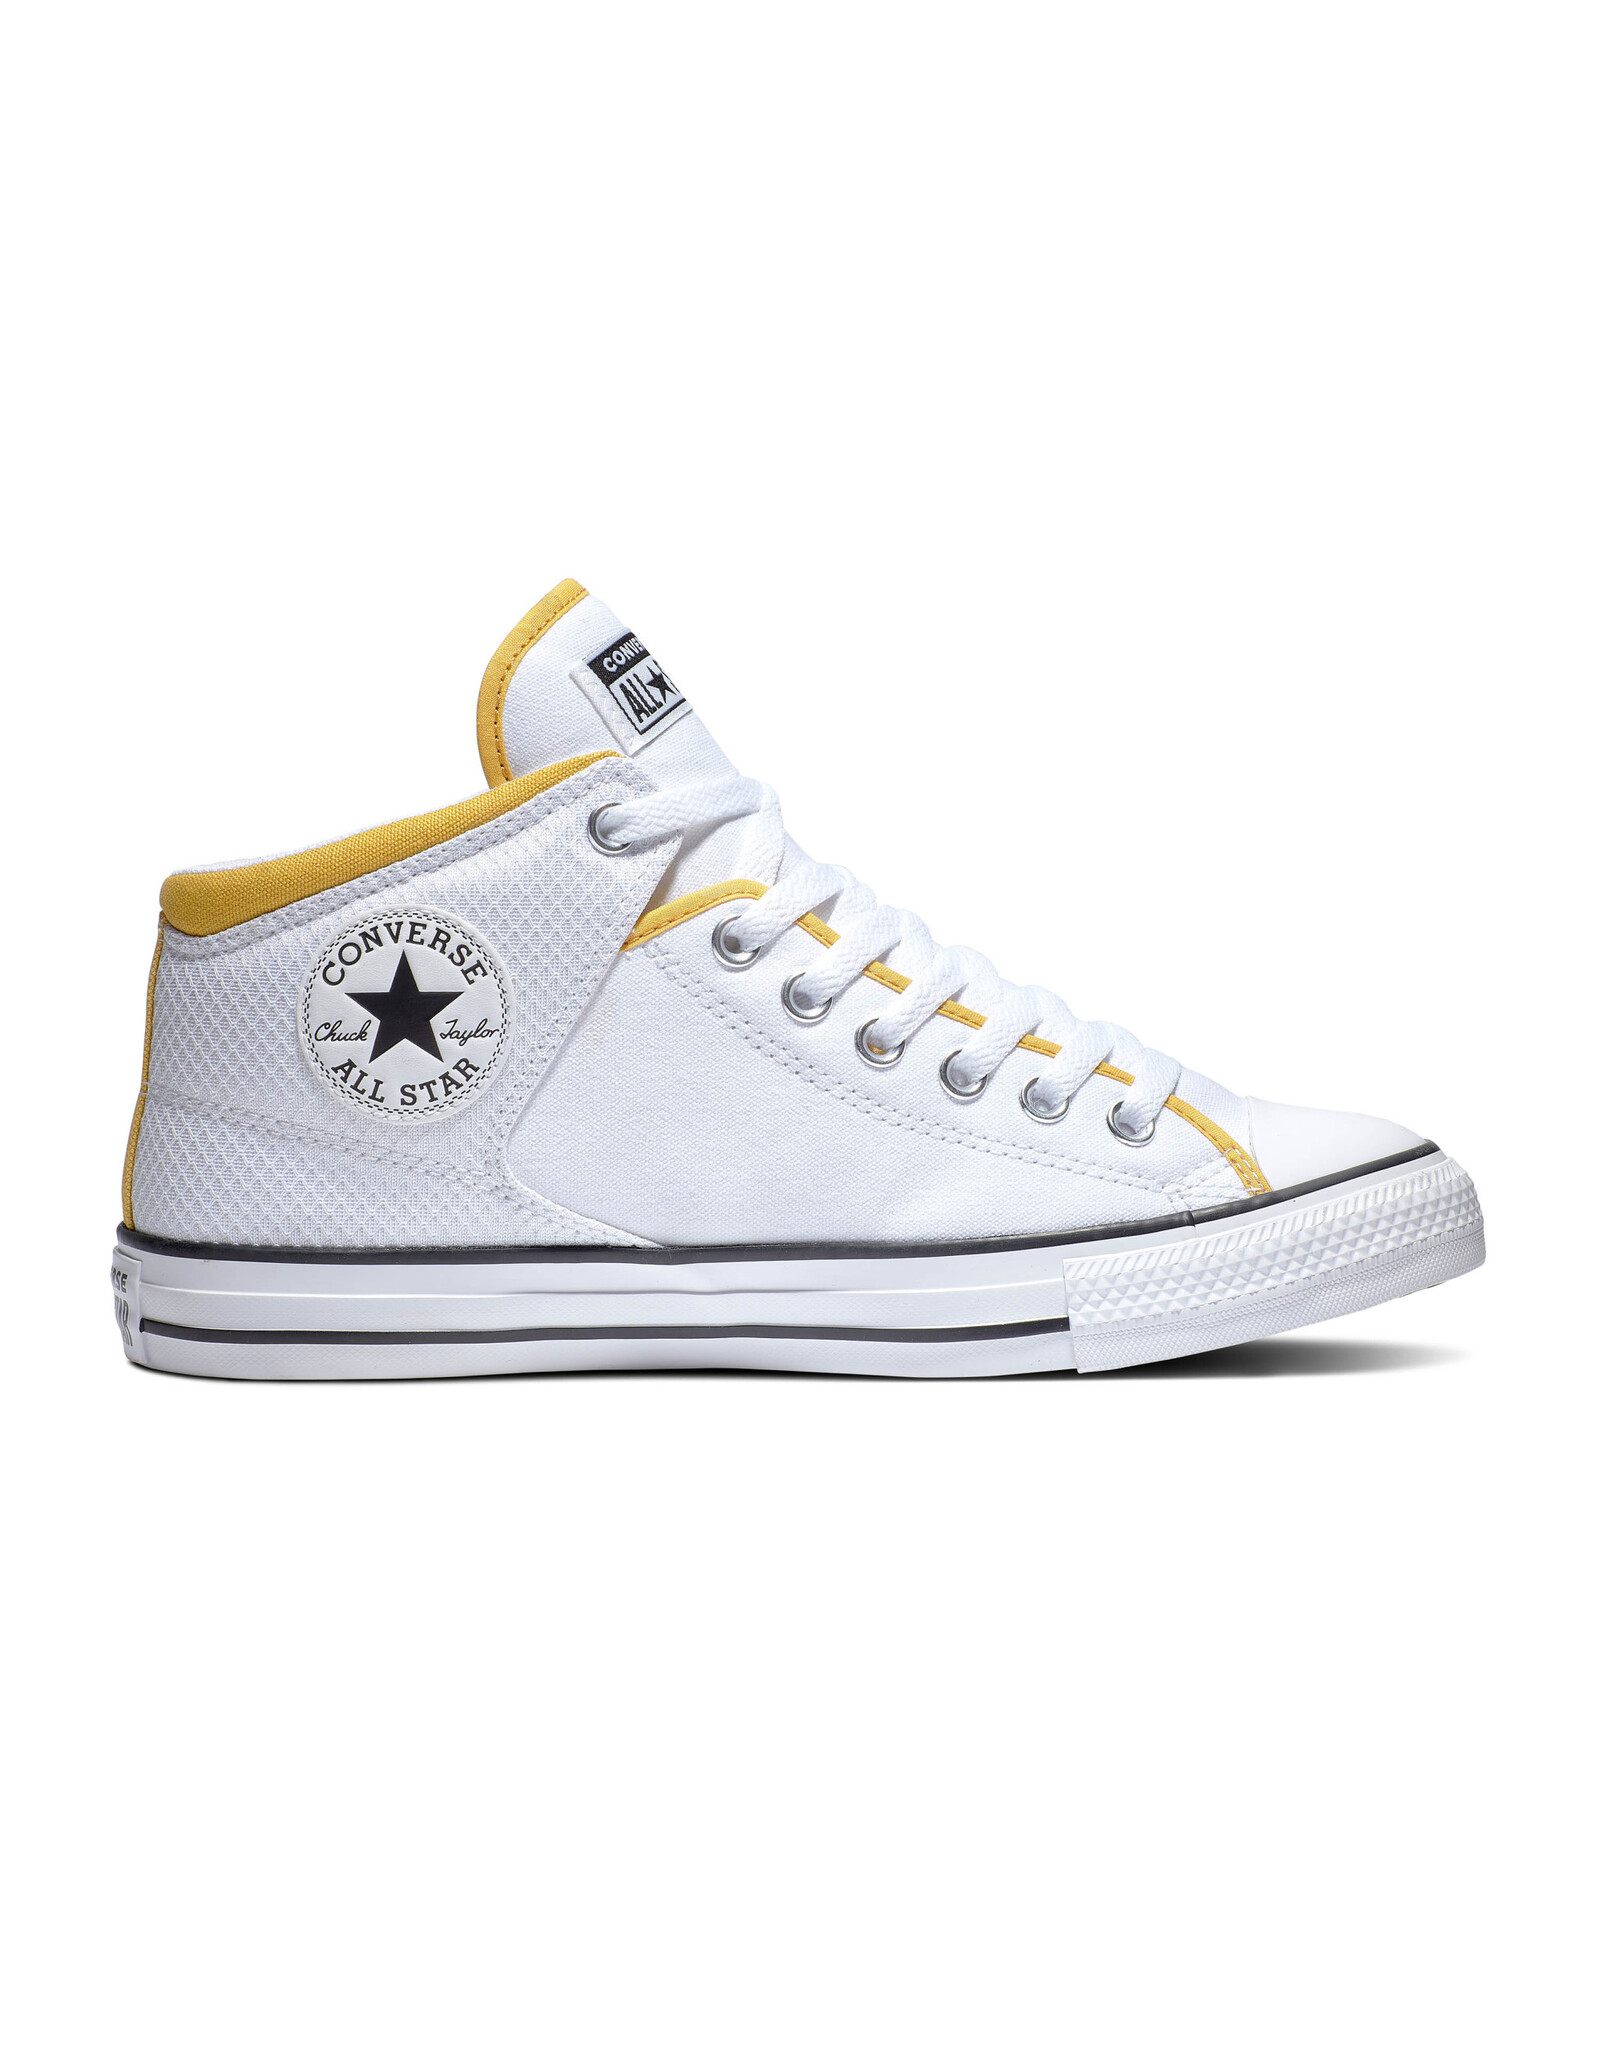 CHUCK TAYLOR HIGH STREET MID WHITE C398WY - A02823C